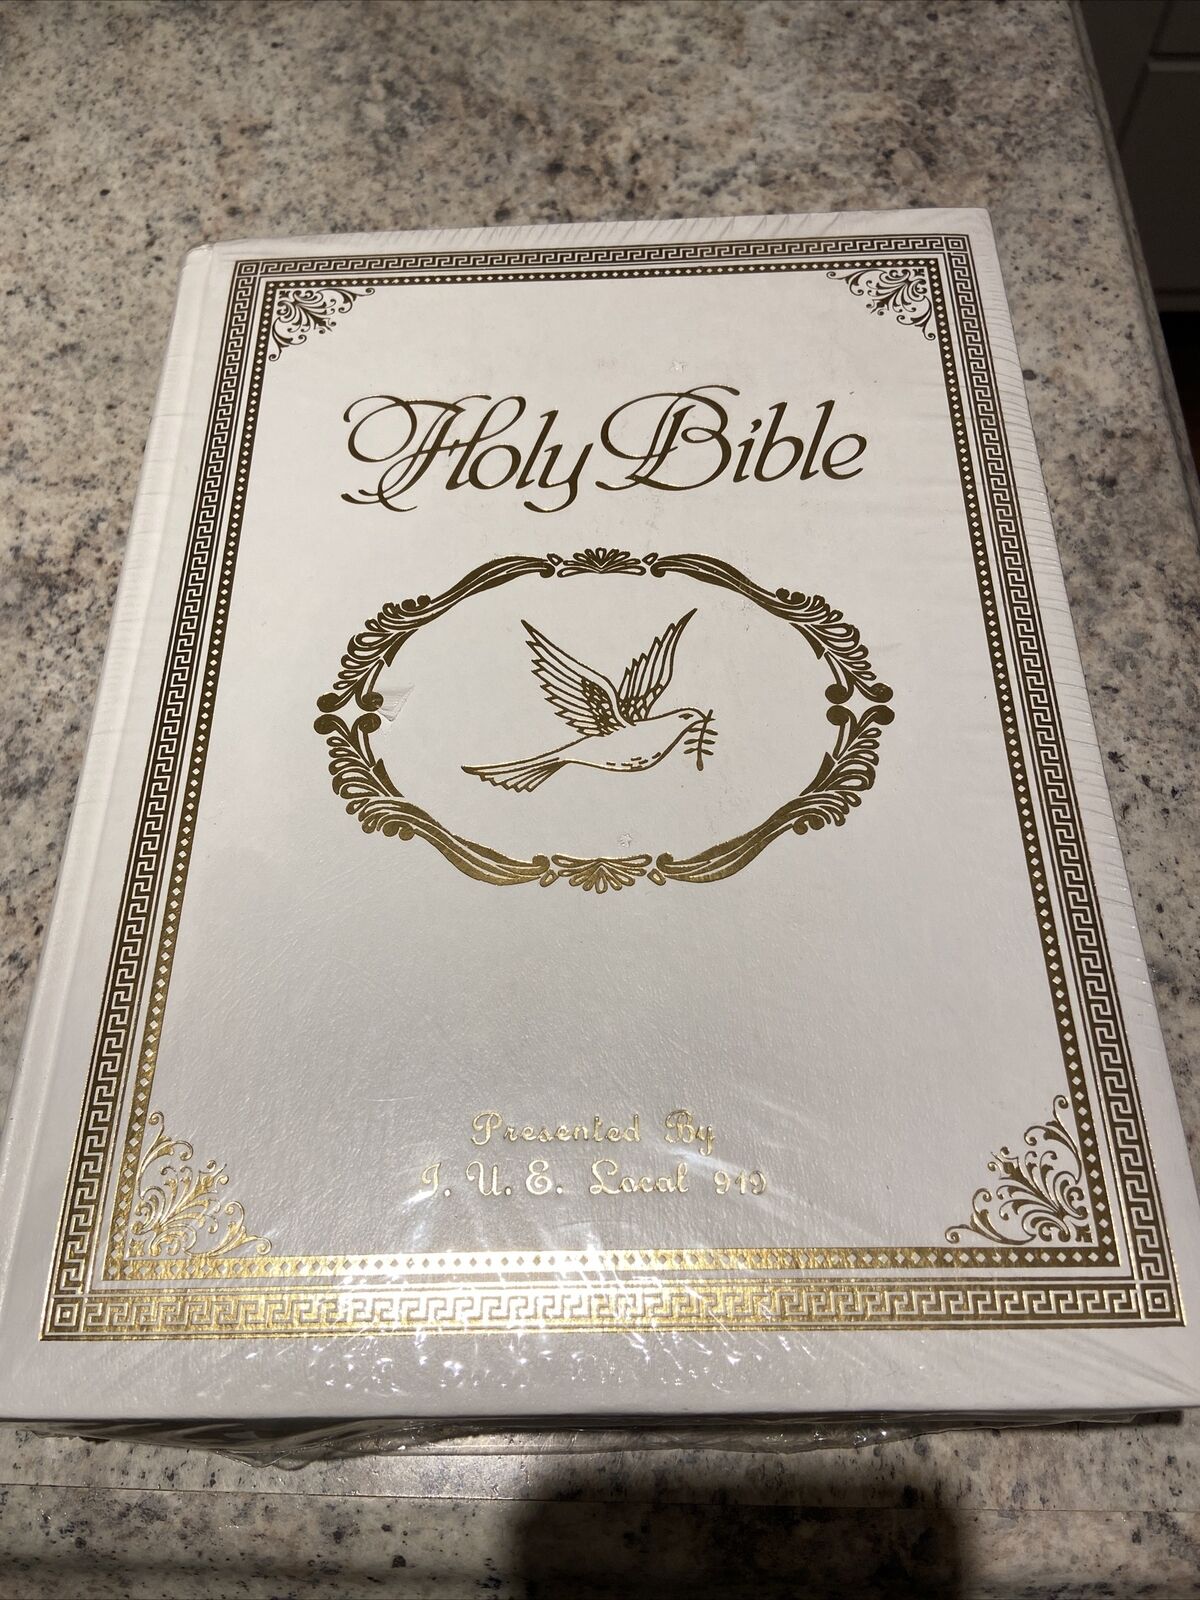 Dove Of Peace Holy Bible Catholic Edition 1991 NAB White & Gold Excellent Cond